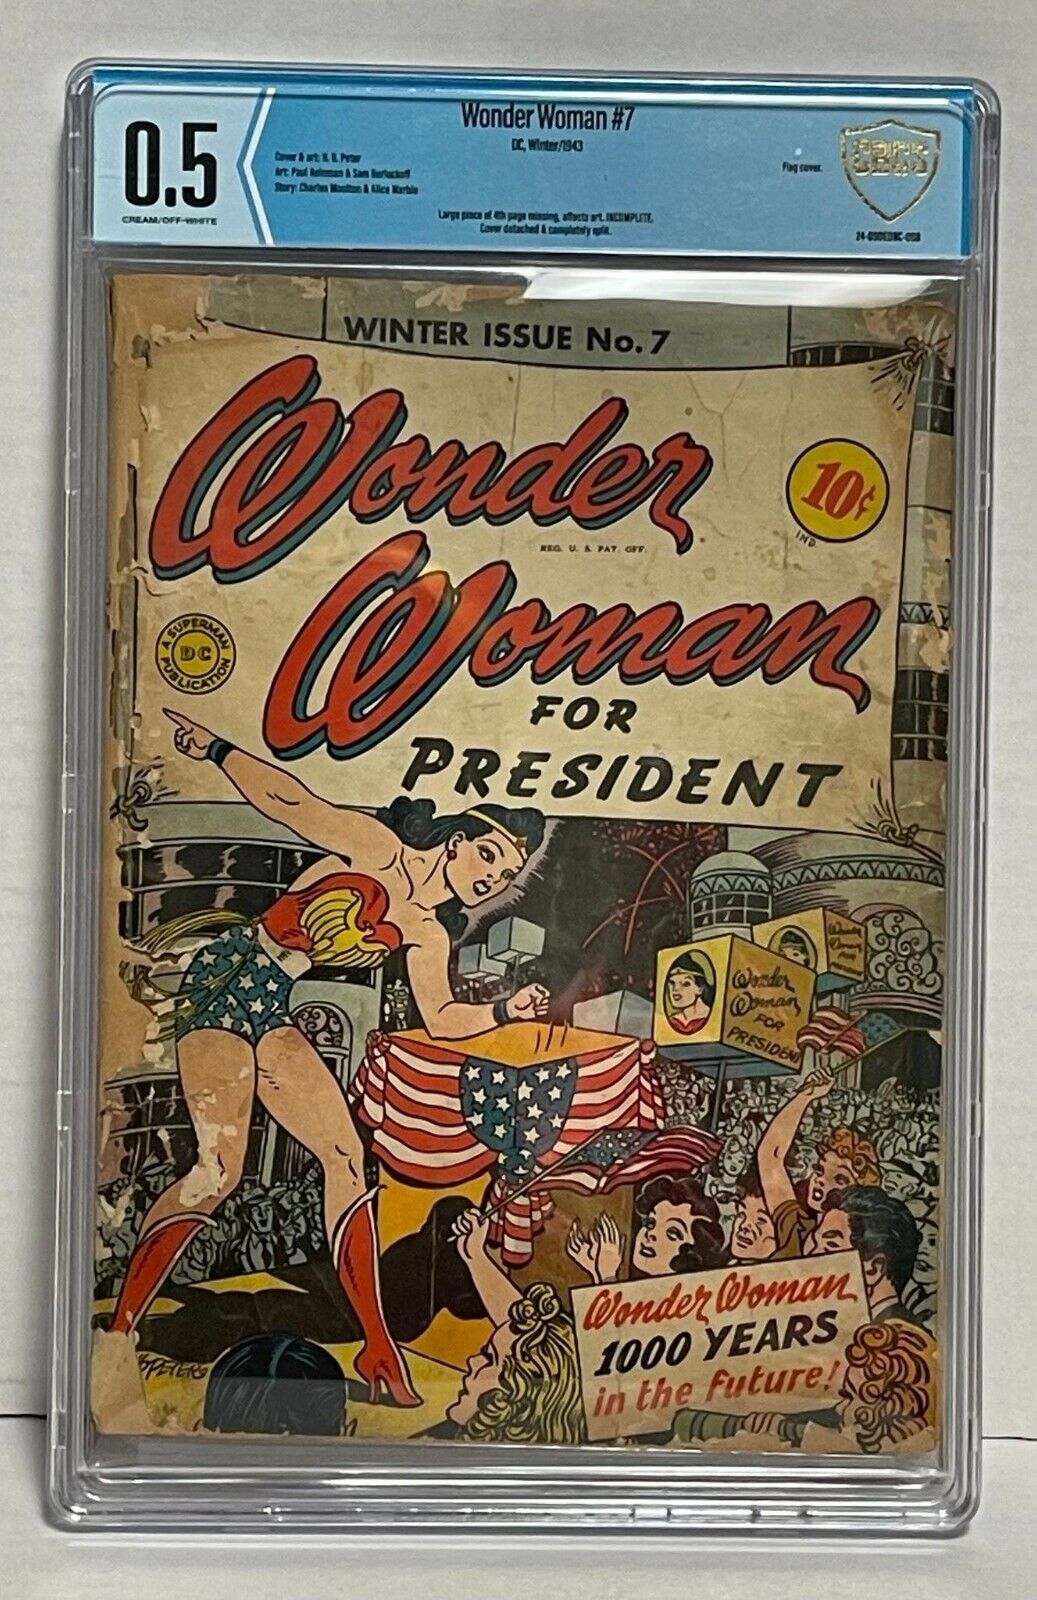 Wonder Woman #7 (DC Comics 1943) CBCS 0.5 Graded Golden Age Key Cover Issue